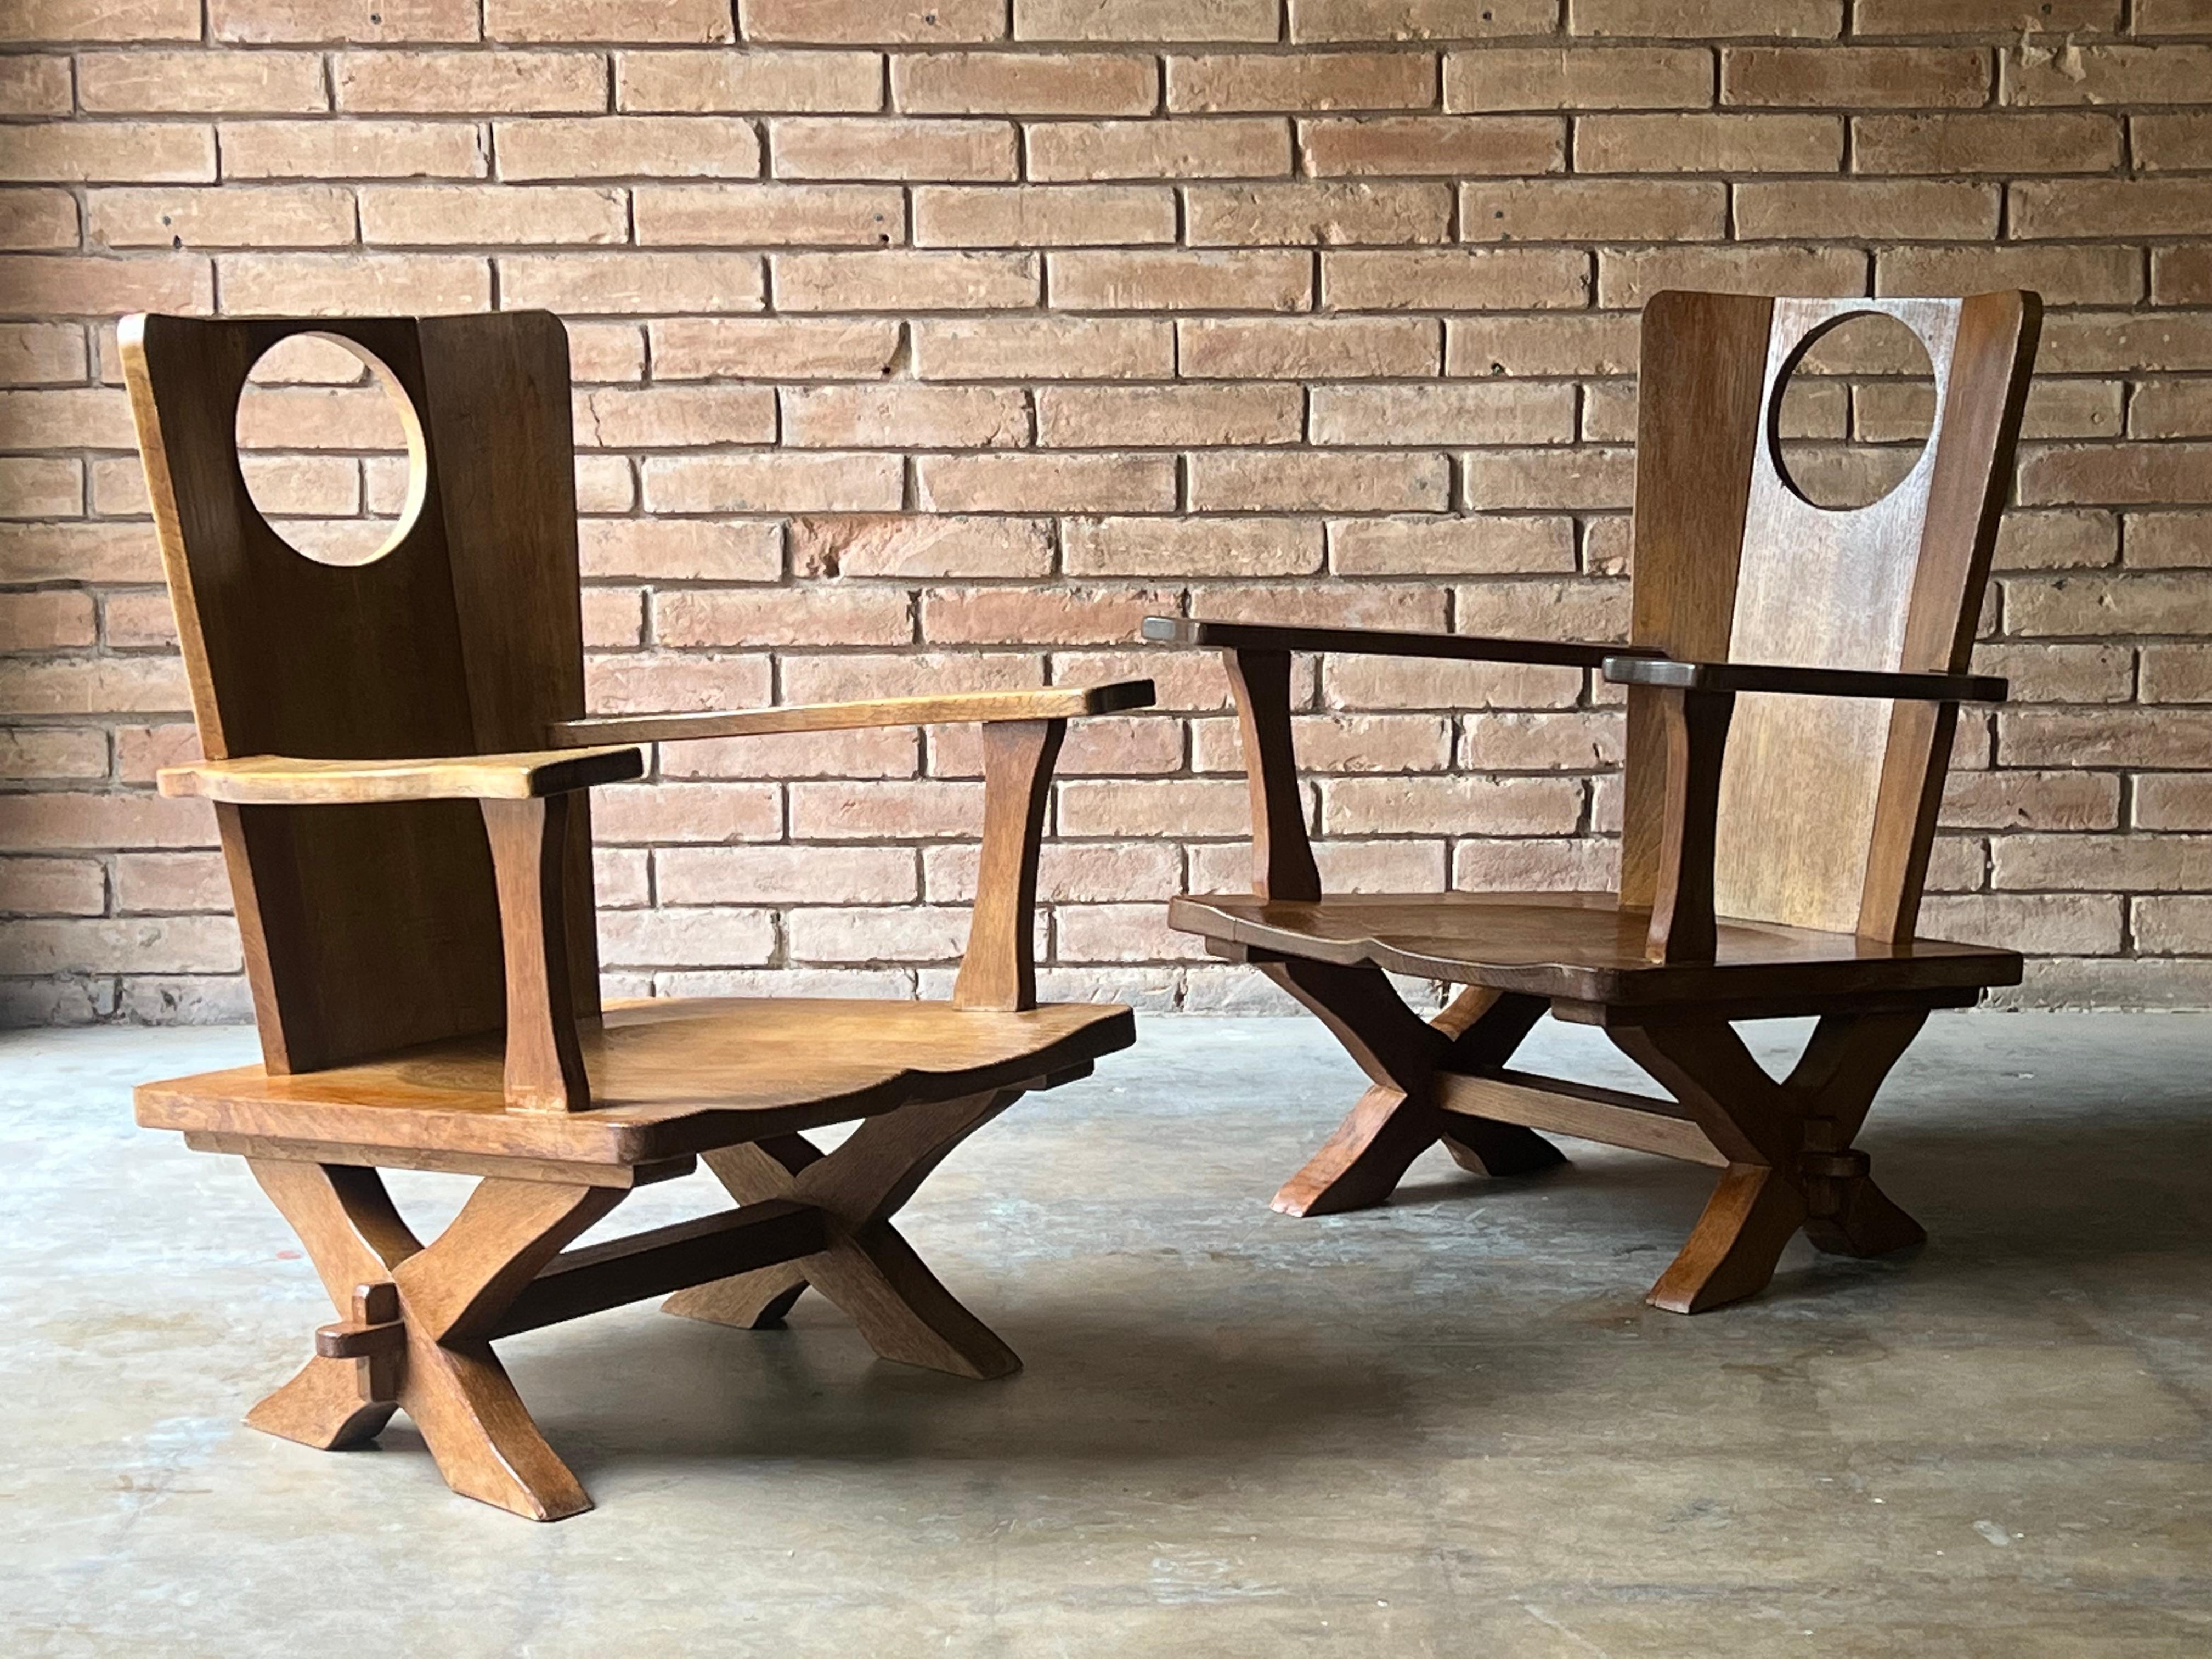 Pair of uncommon low arm chairs in oak likely manufactured in Belgium or the Netherlands, c. 1970s. They are sculptural and well made, while being functional and comfortable. A lovely constructive quality to them. These certainly check all the